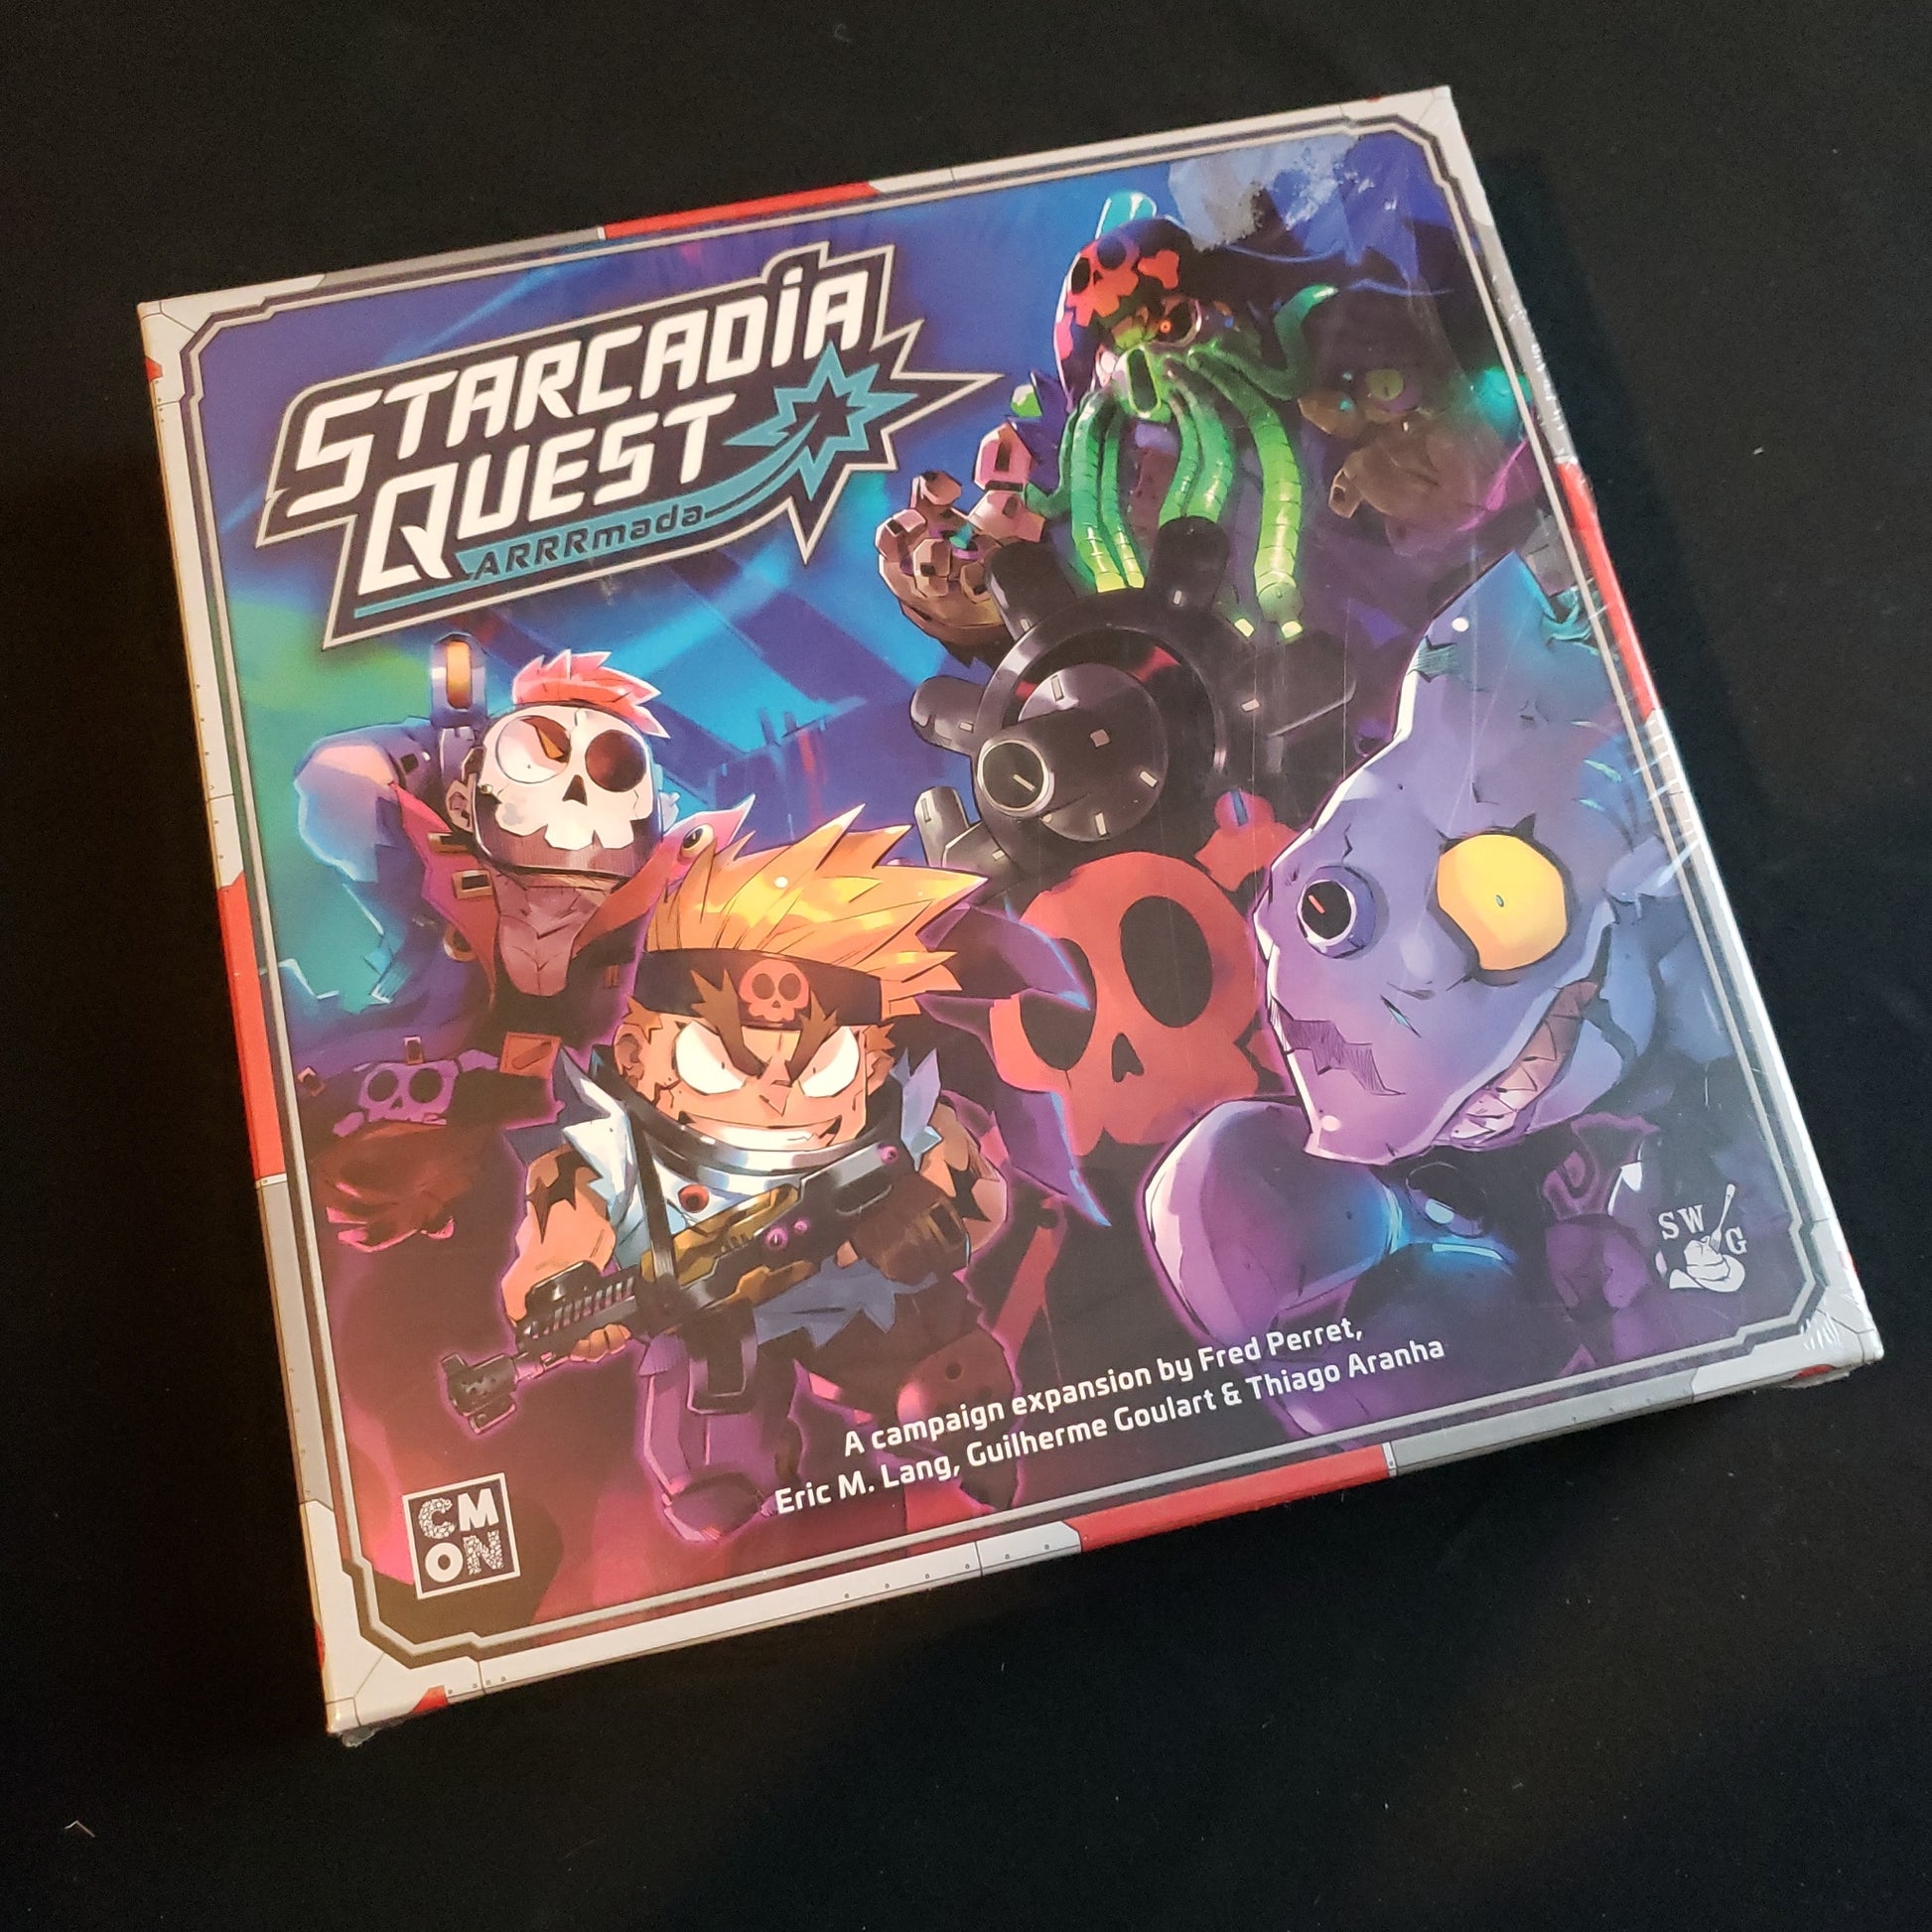 Image shows the front of the box for the ARRRmada Expansion for the Starcadia Quest board game